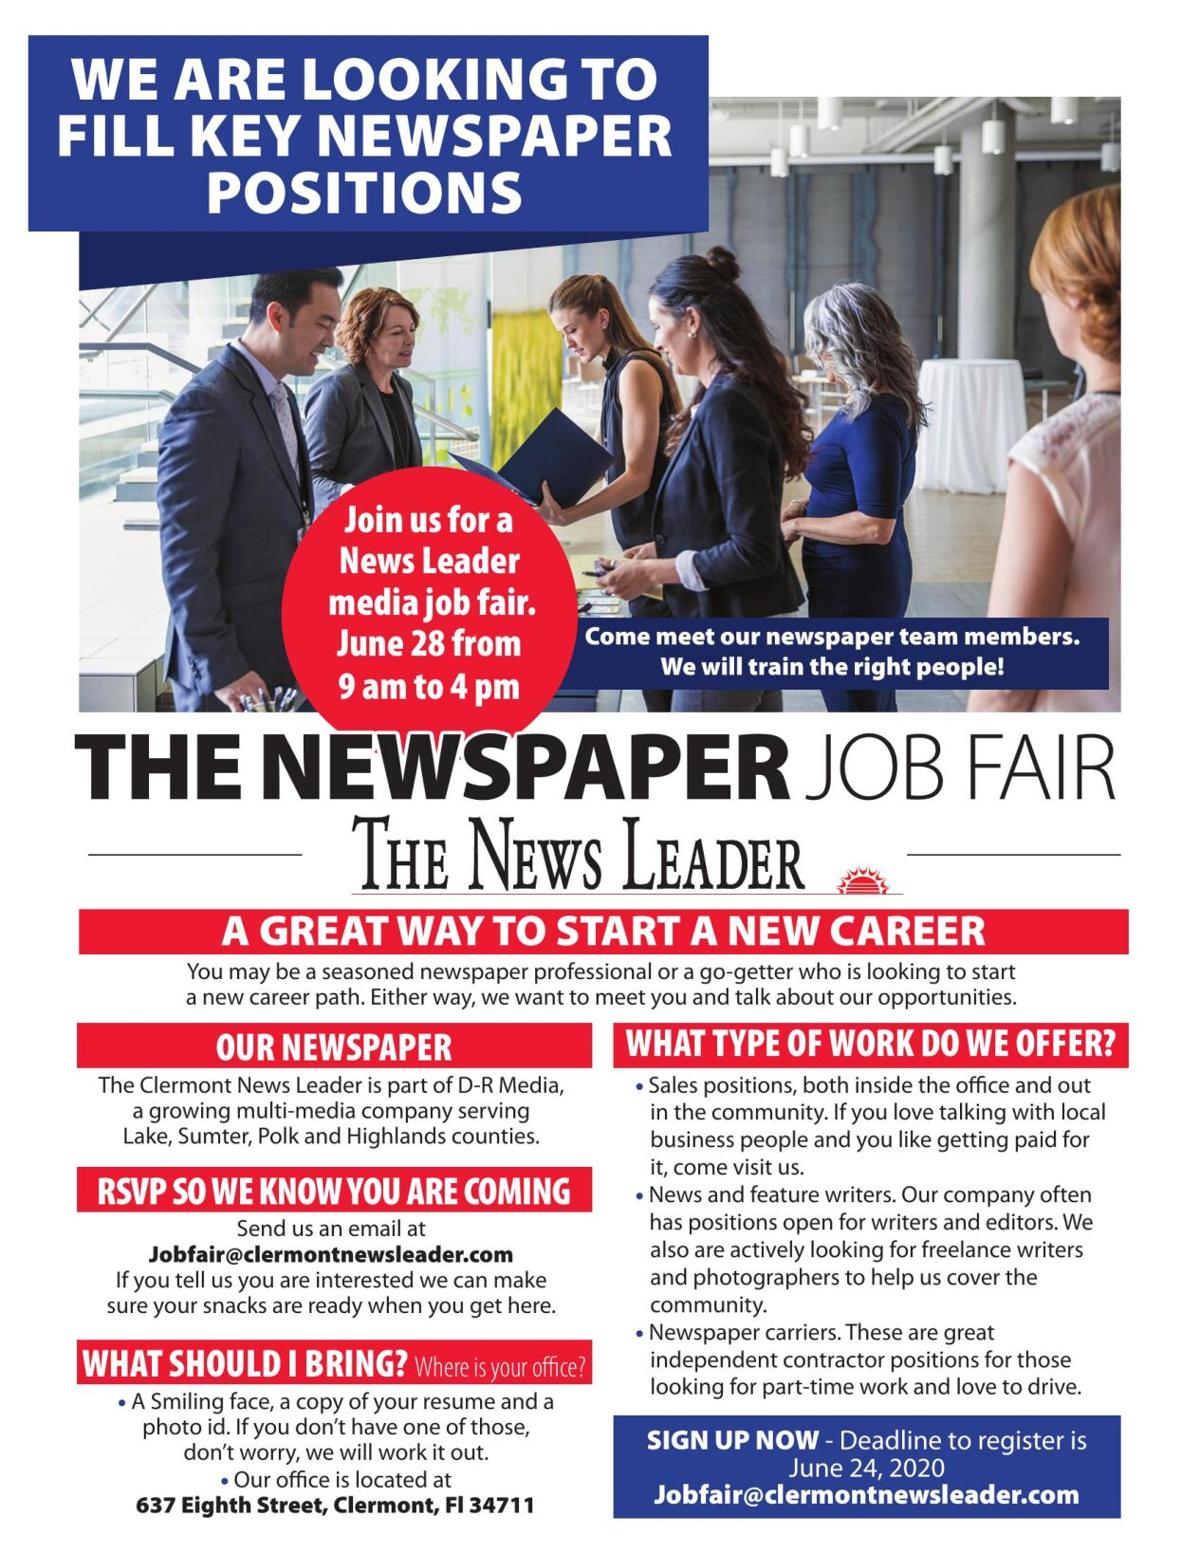 WE ARE LOOKING TO FILL KEY NEWSPAPER POSITIONS